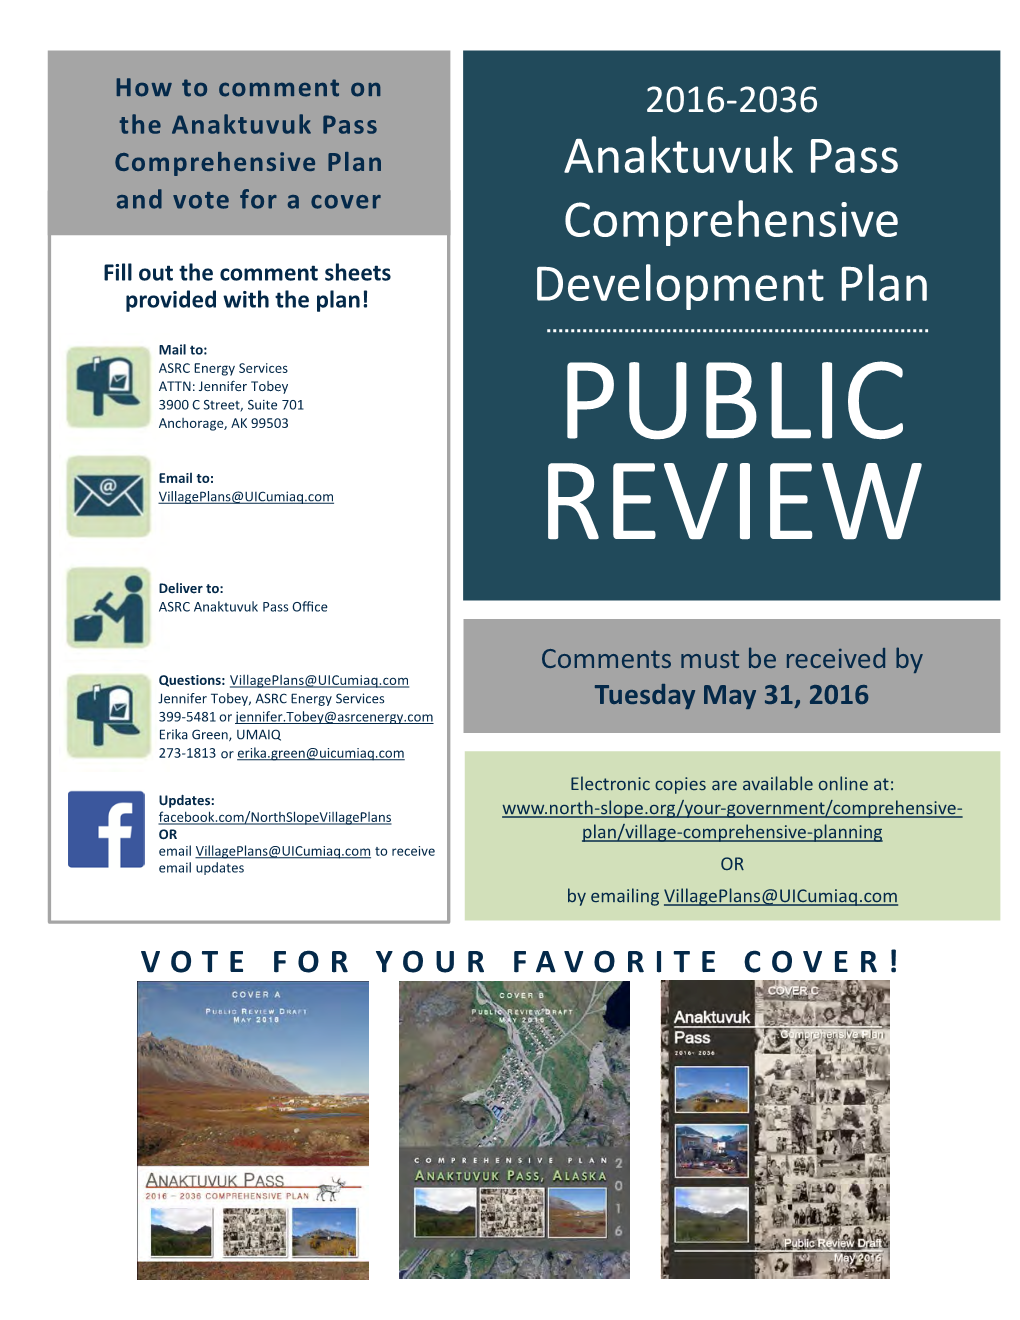 Anaktuvuk Pass Comprehensive Plan Anaktuvuk Pass and Vote for a Cover Comprehensive Fill out the Comment Sheets Provided with the Plan! Development Plan